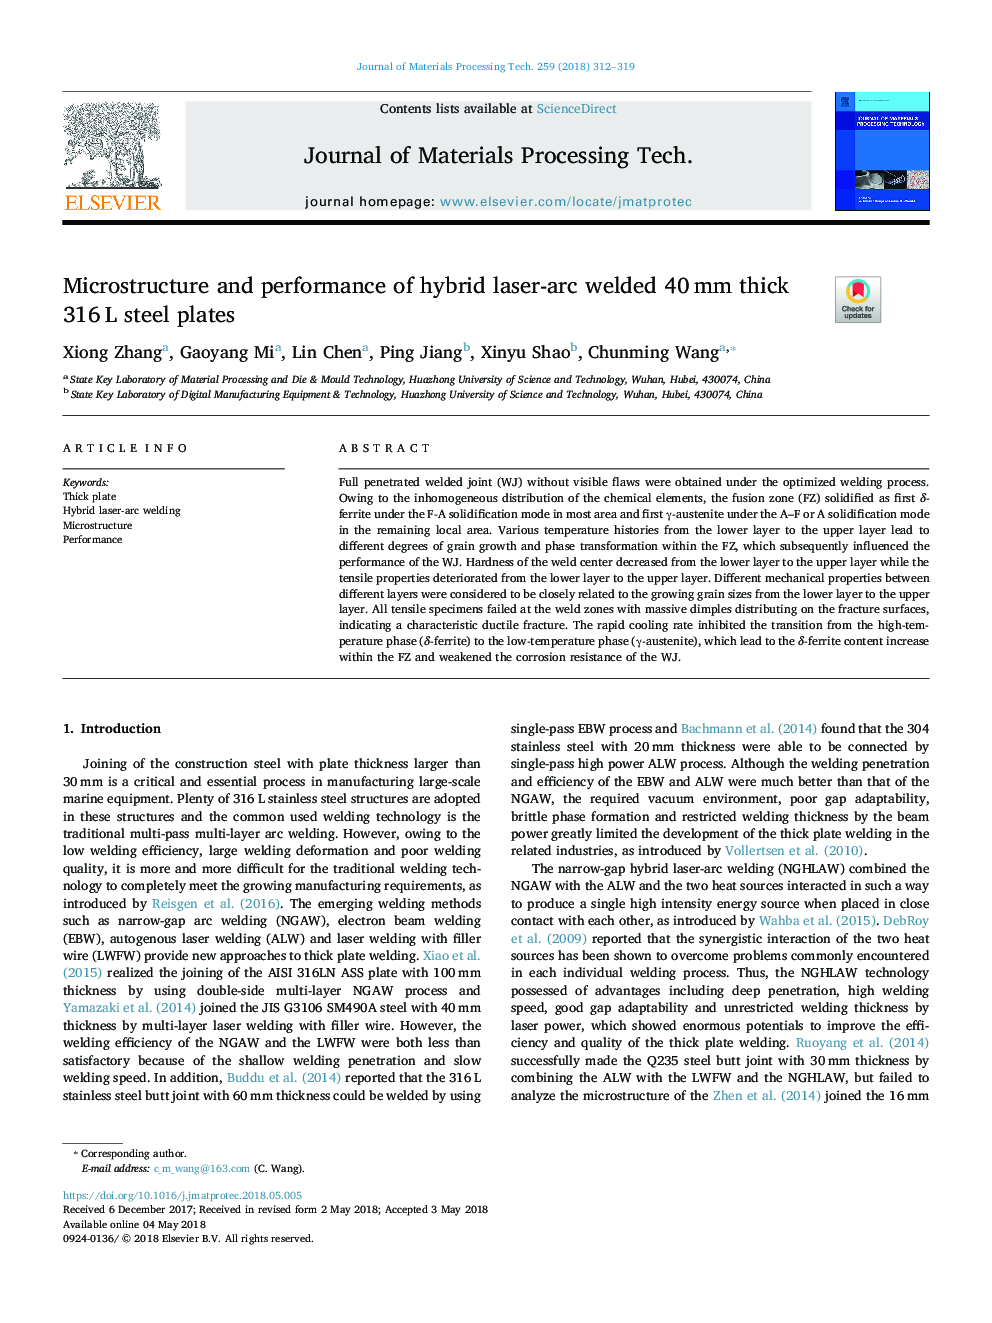 Microstructure and performance of hybrid laser-arc welded 40â¯mm thick 316â¯L steel plates